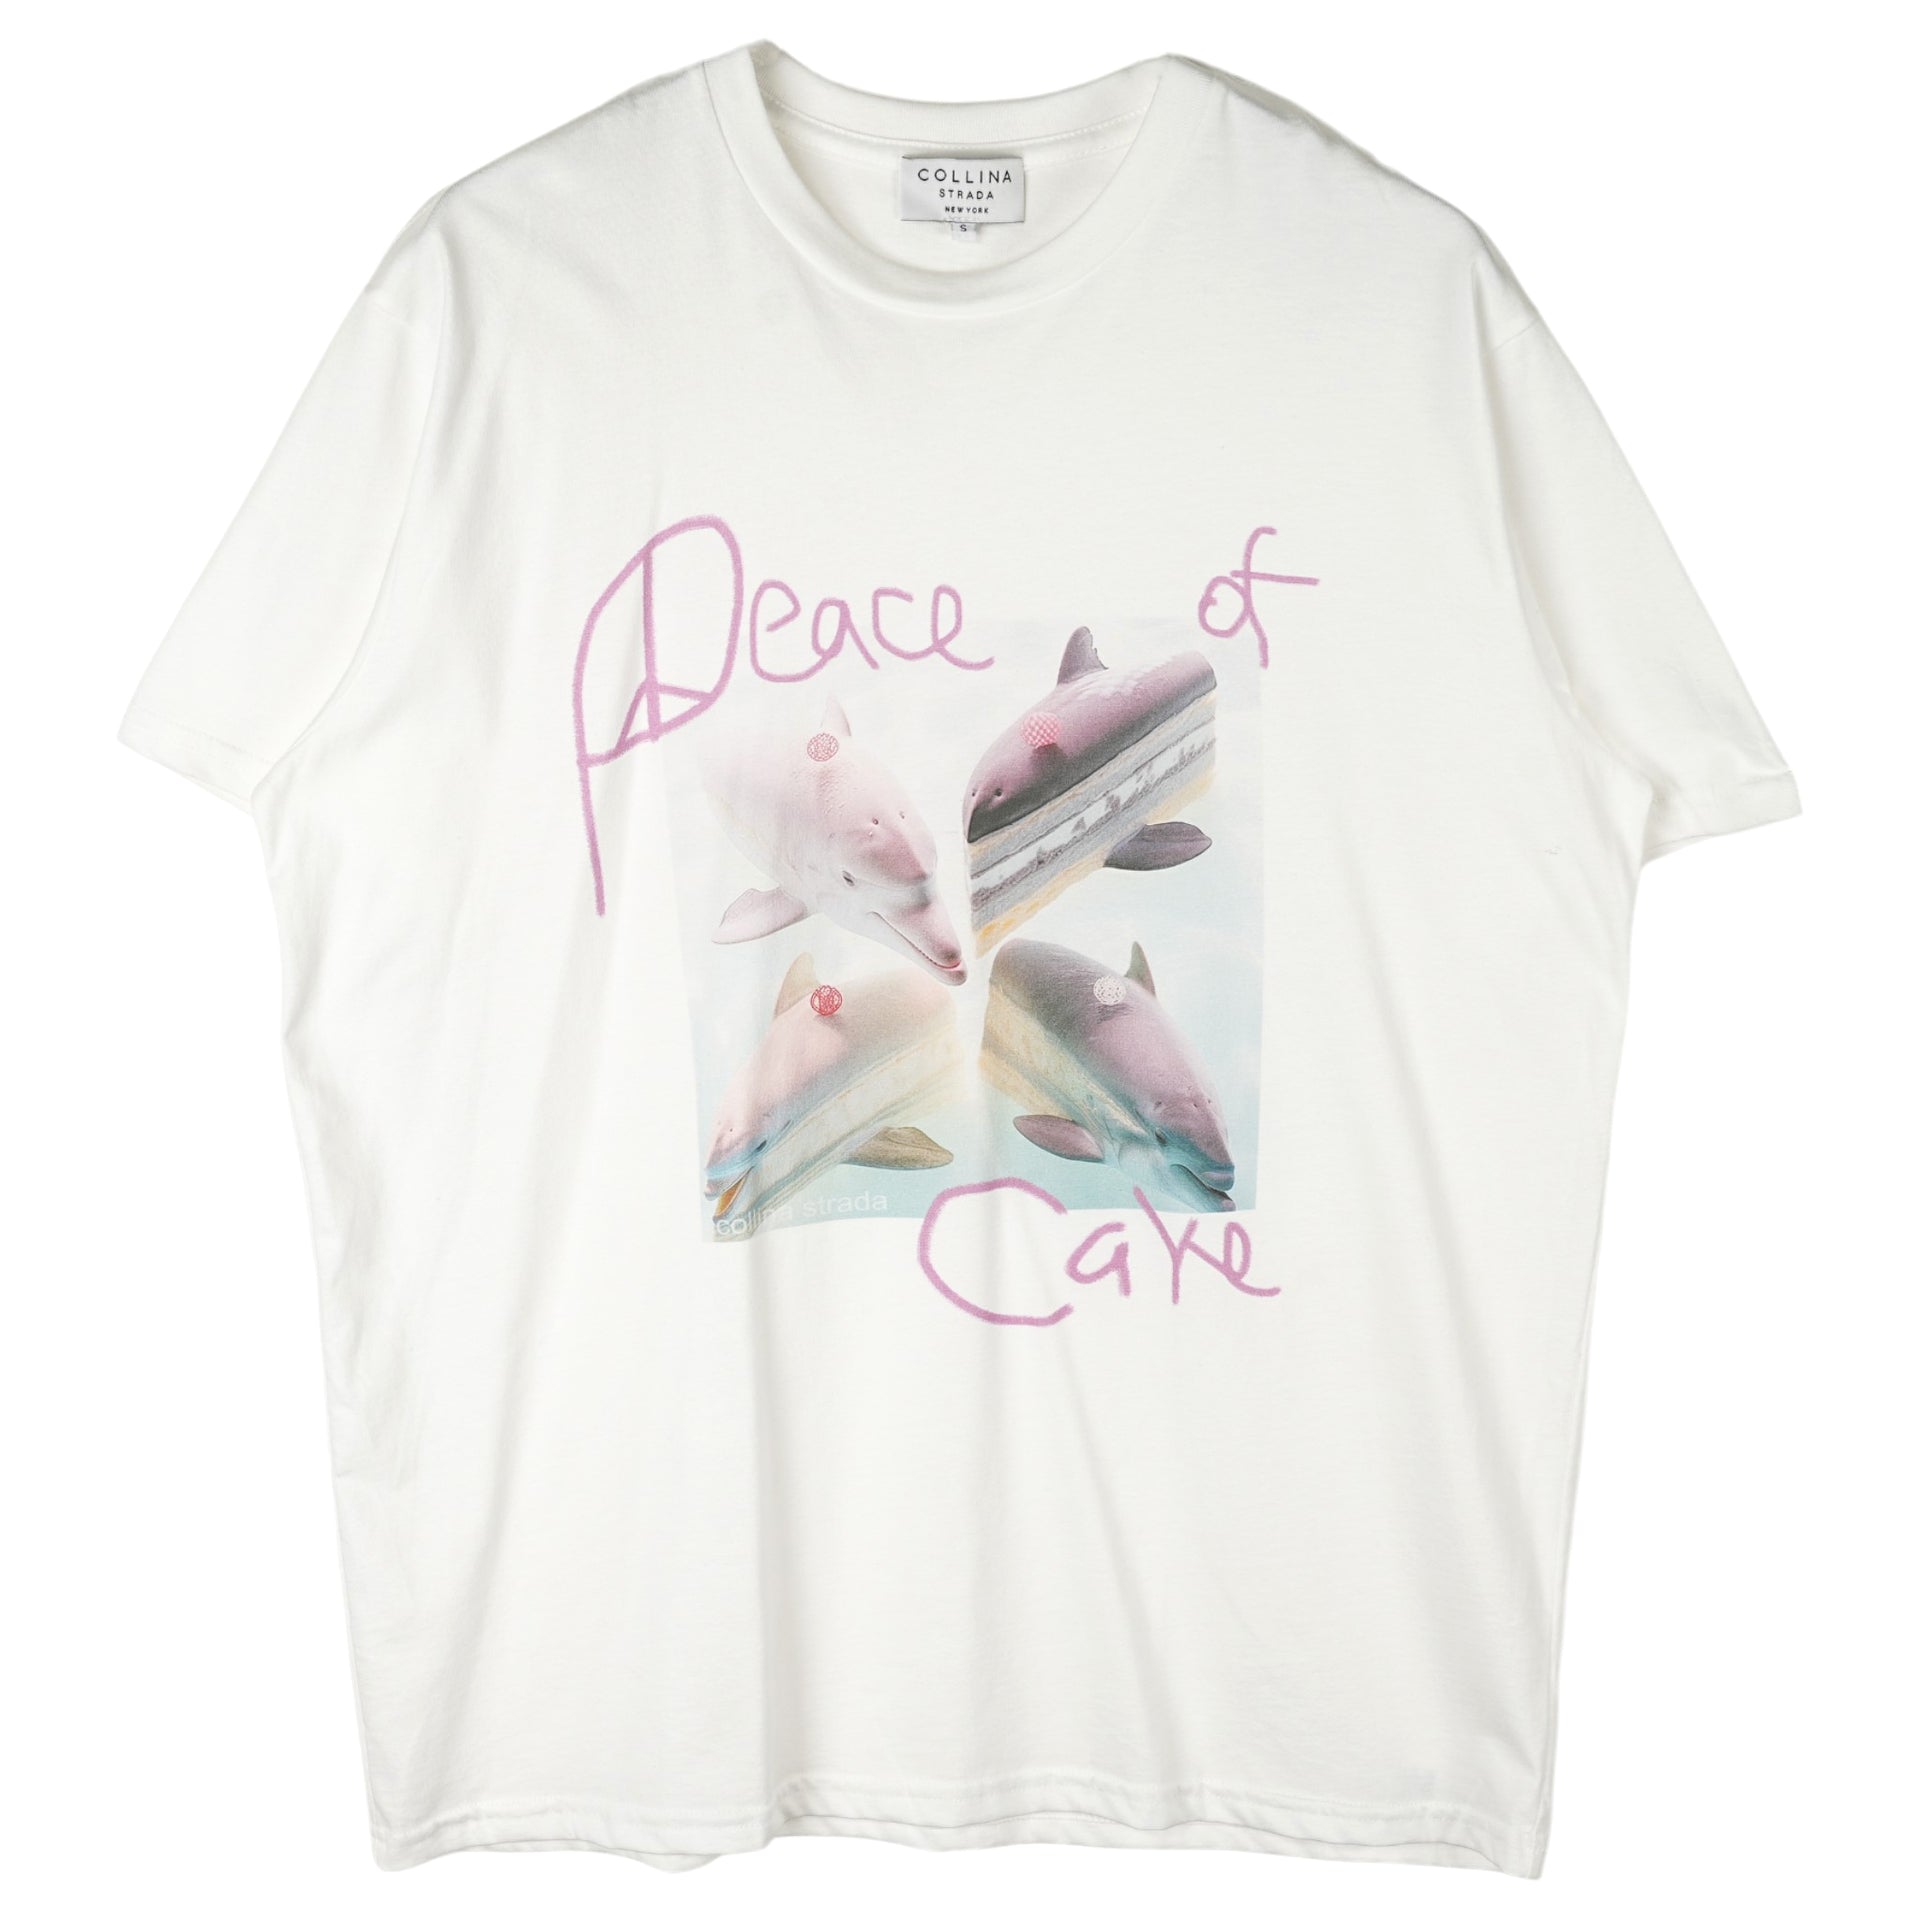 GRAPHIC TEE / PEACE OF CAKE